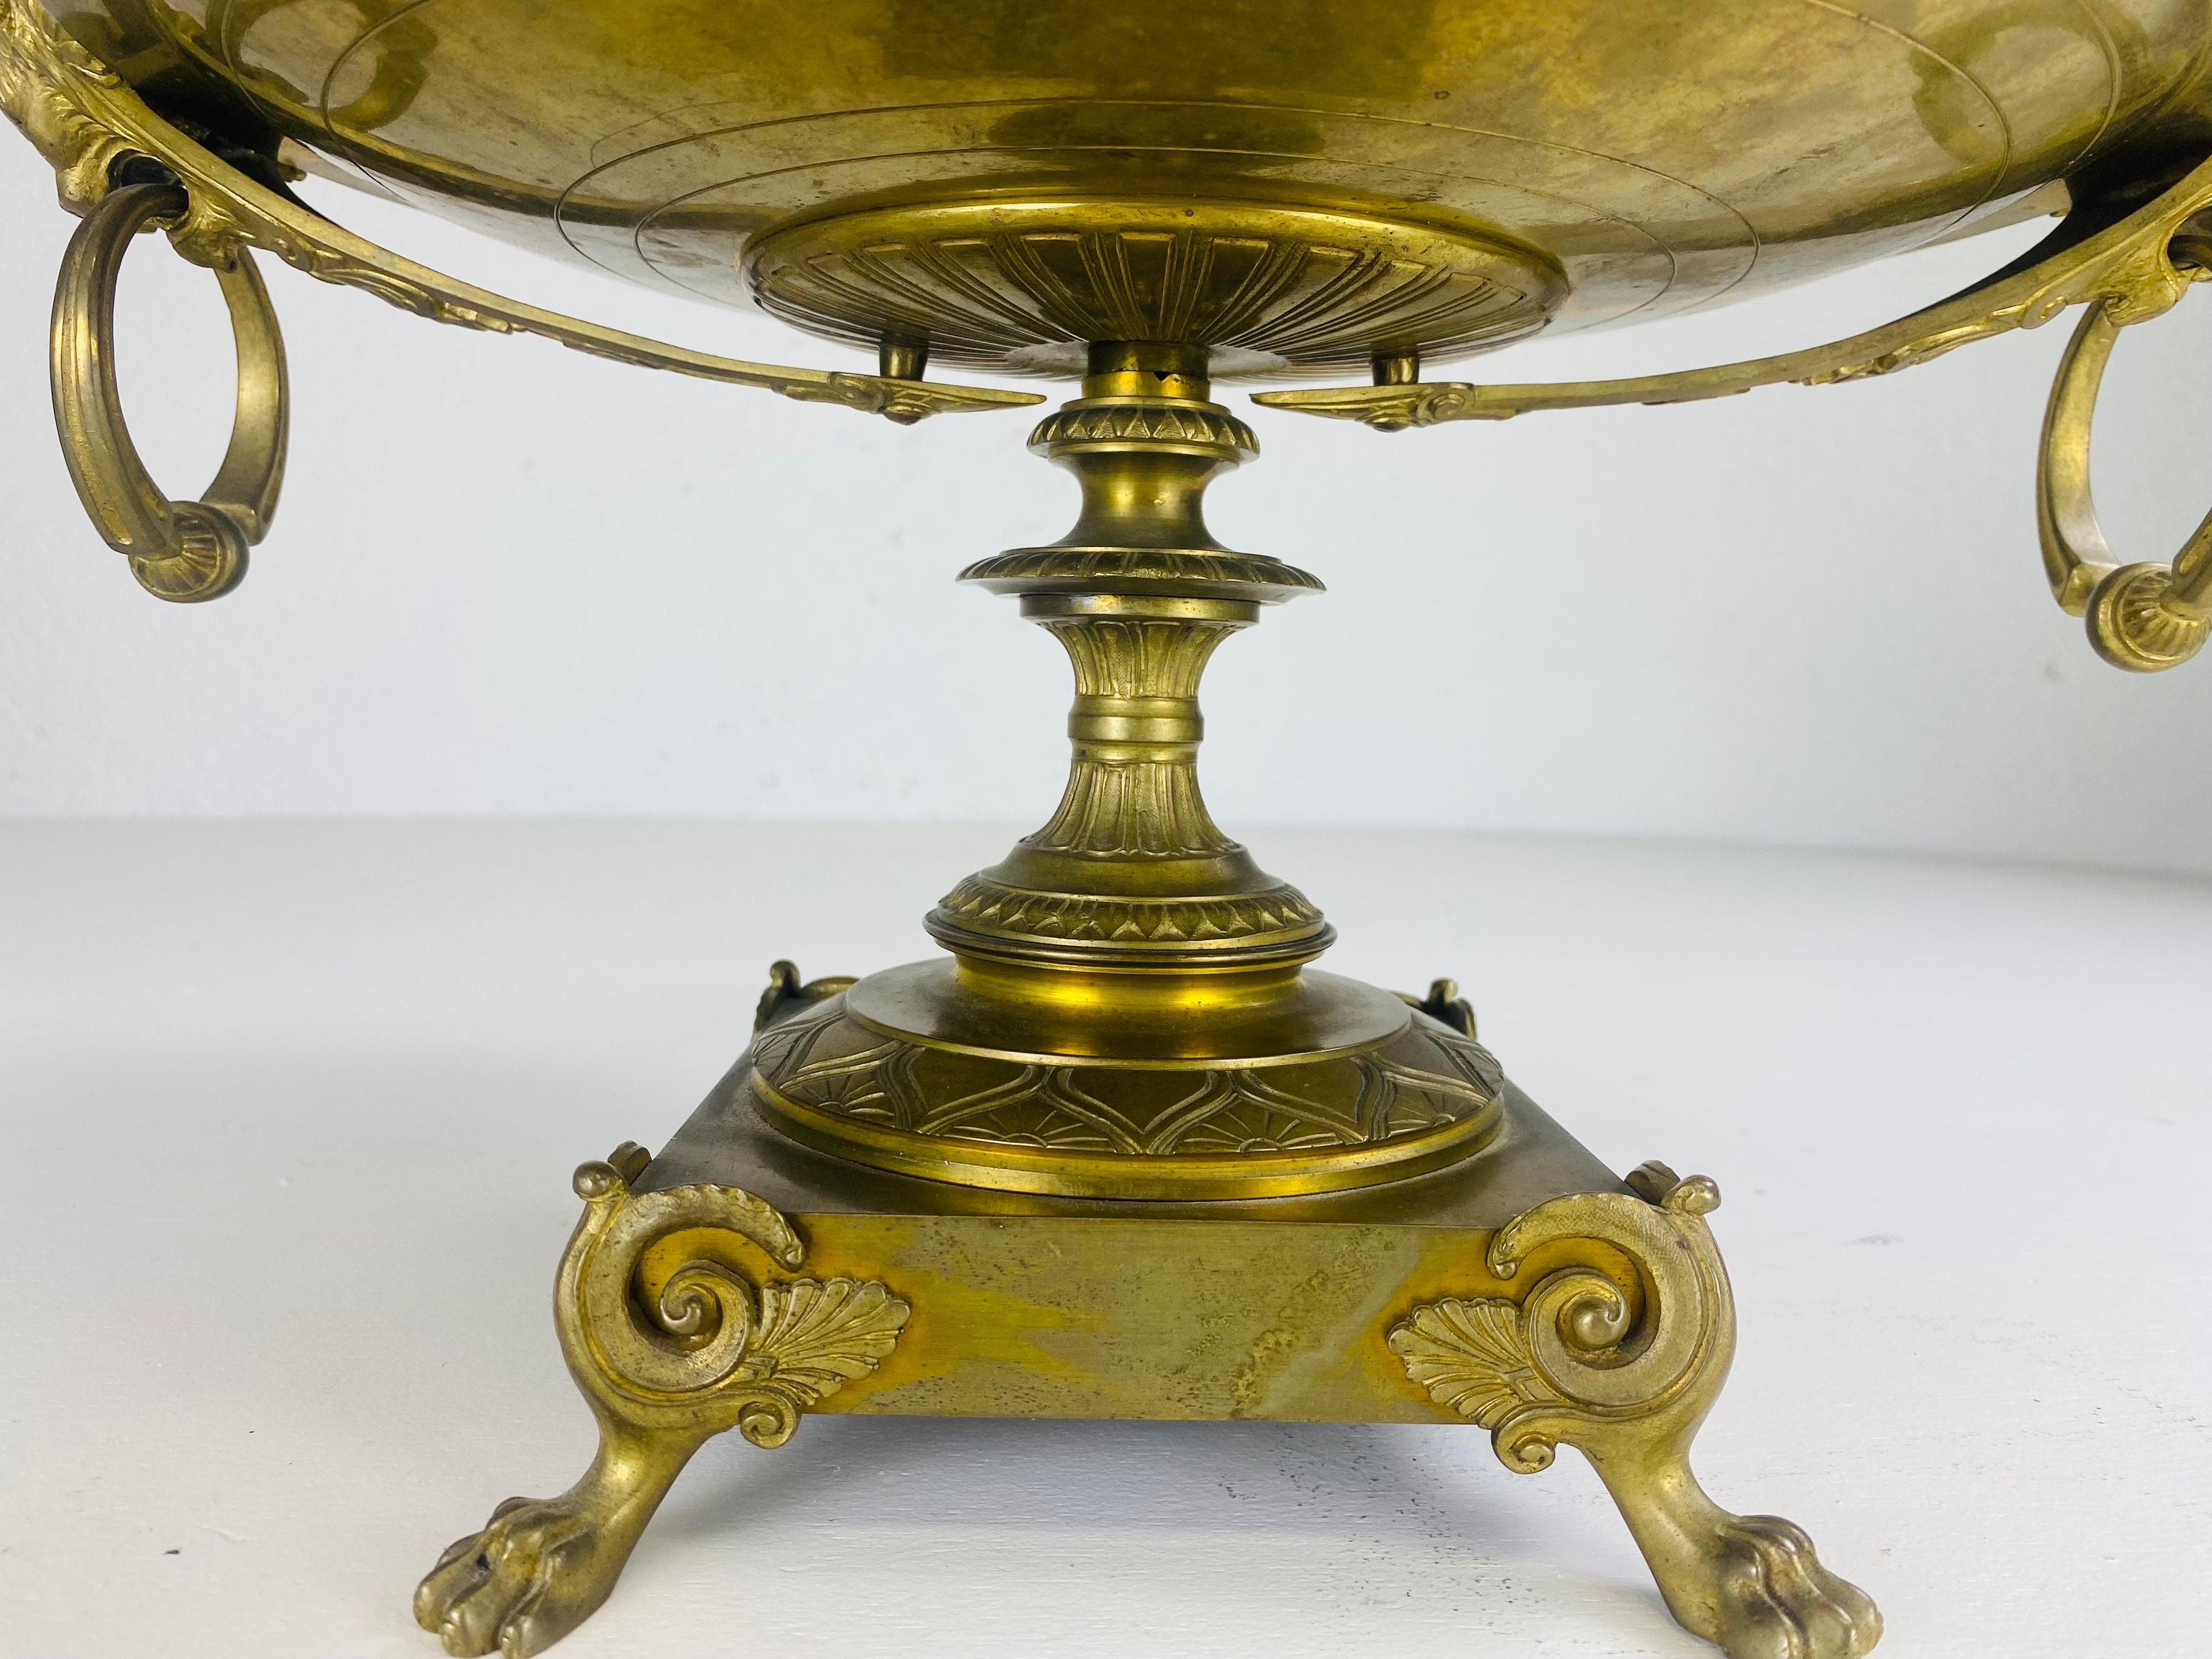 This is a late 19th century Italian neo classical bronze compote. This classical bronze compote has ornate claw feet and mythical figures on either side of the bowl with rings. This classical compote has a Romanesca medallion in the center in